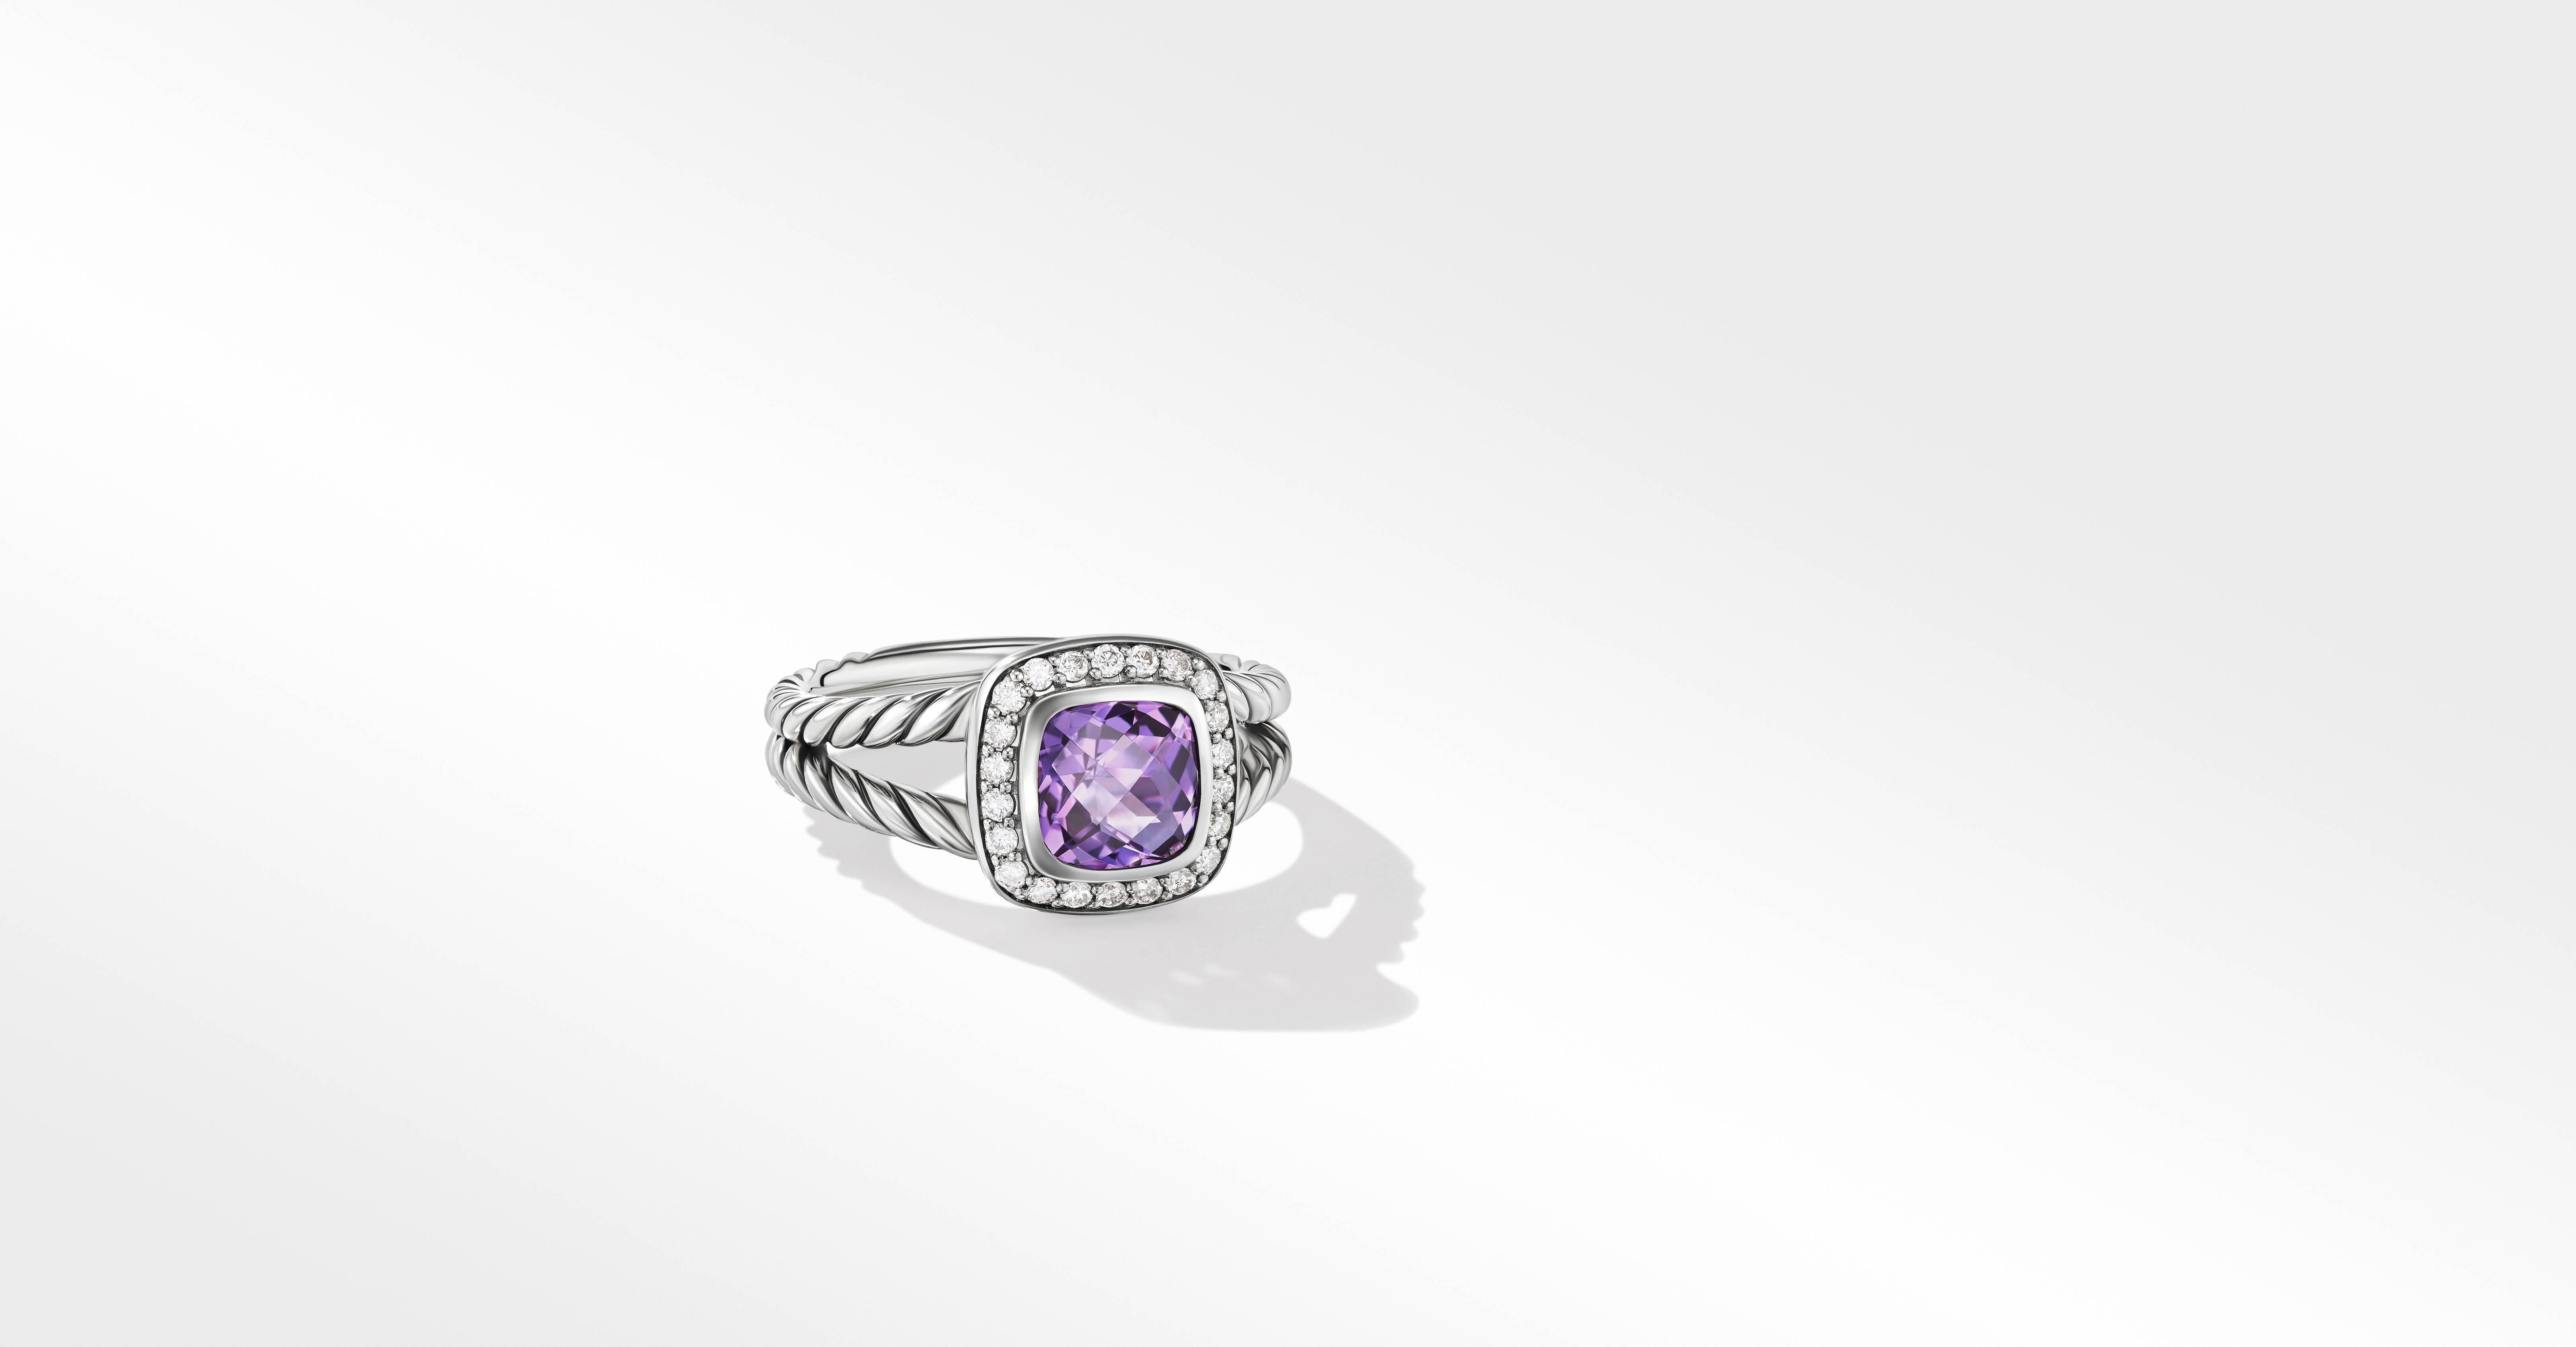 David Yurman | Petite Albion® Ring in Sterling Silver with Amethyst and Pavé Diamonds